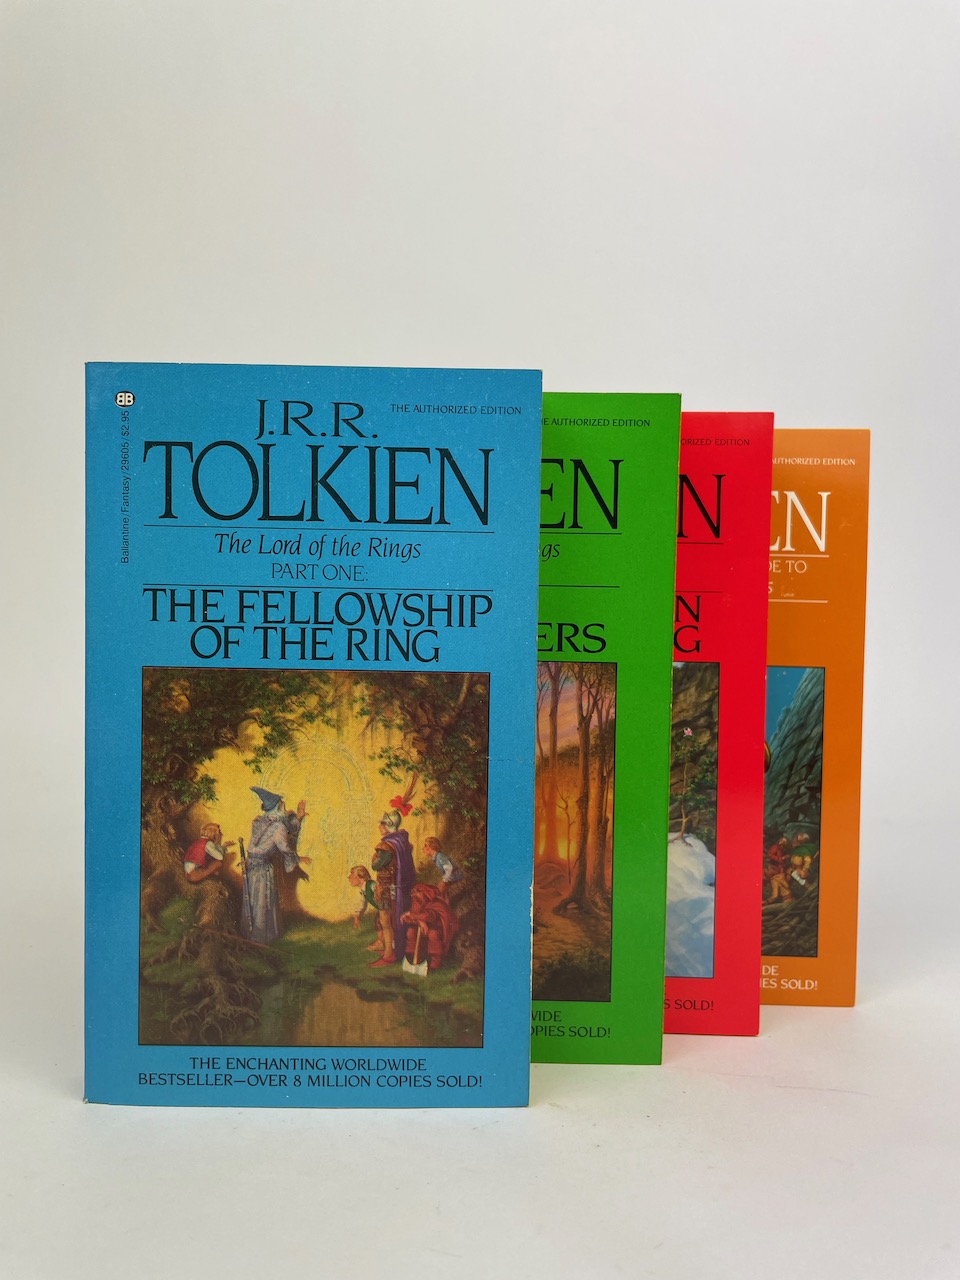 The Lord of the Rings and The Hobbit set from 1984, by Ballantine Books, New York 14